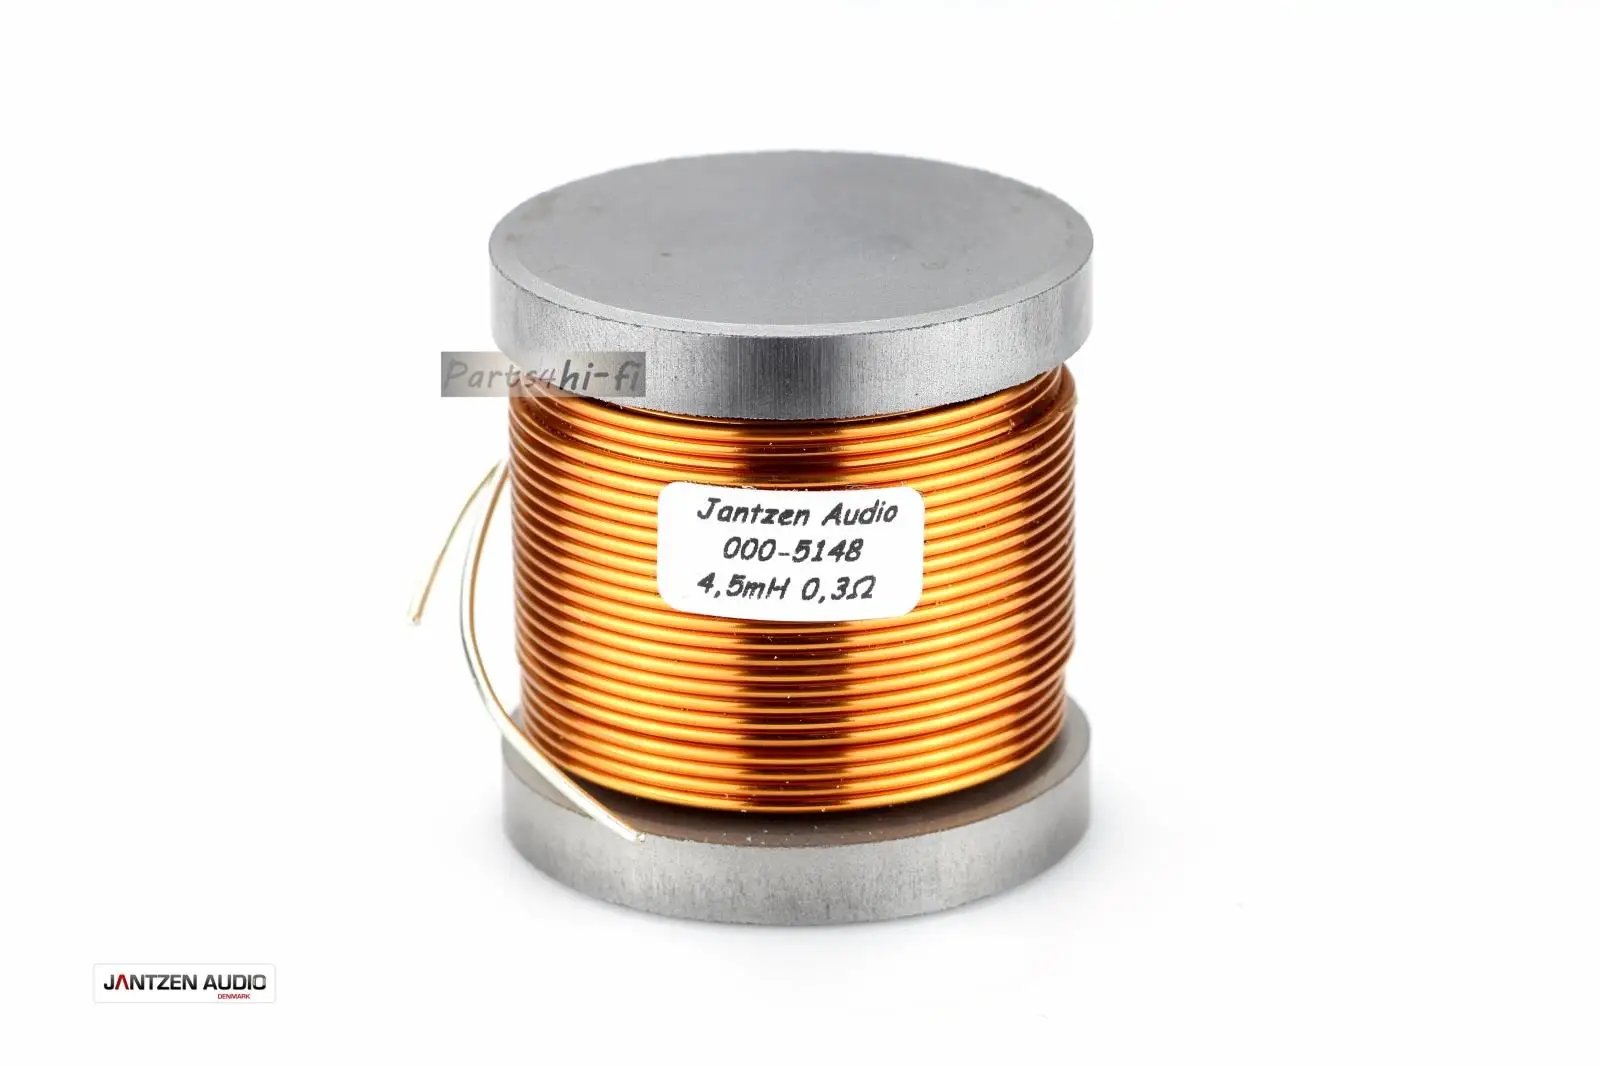 2pcs/lot Denmark Jantzen-audio oxygen-free copper 1.2mm wire diameter series frequency division fever iron core inductor coil